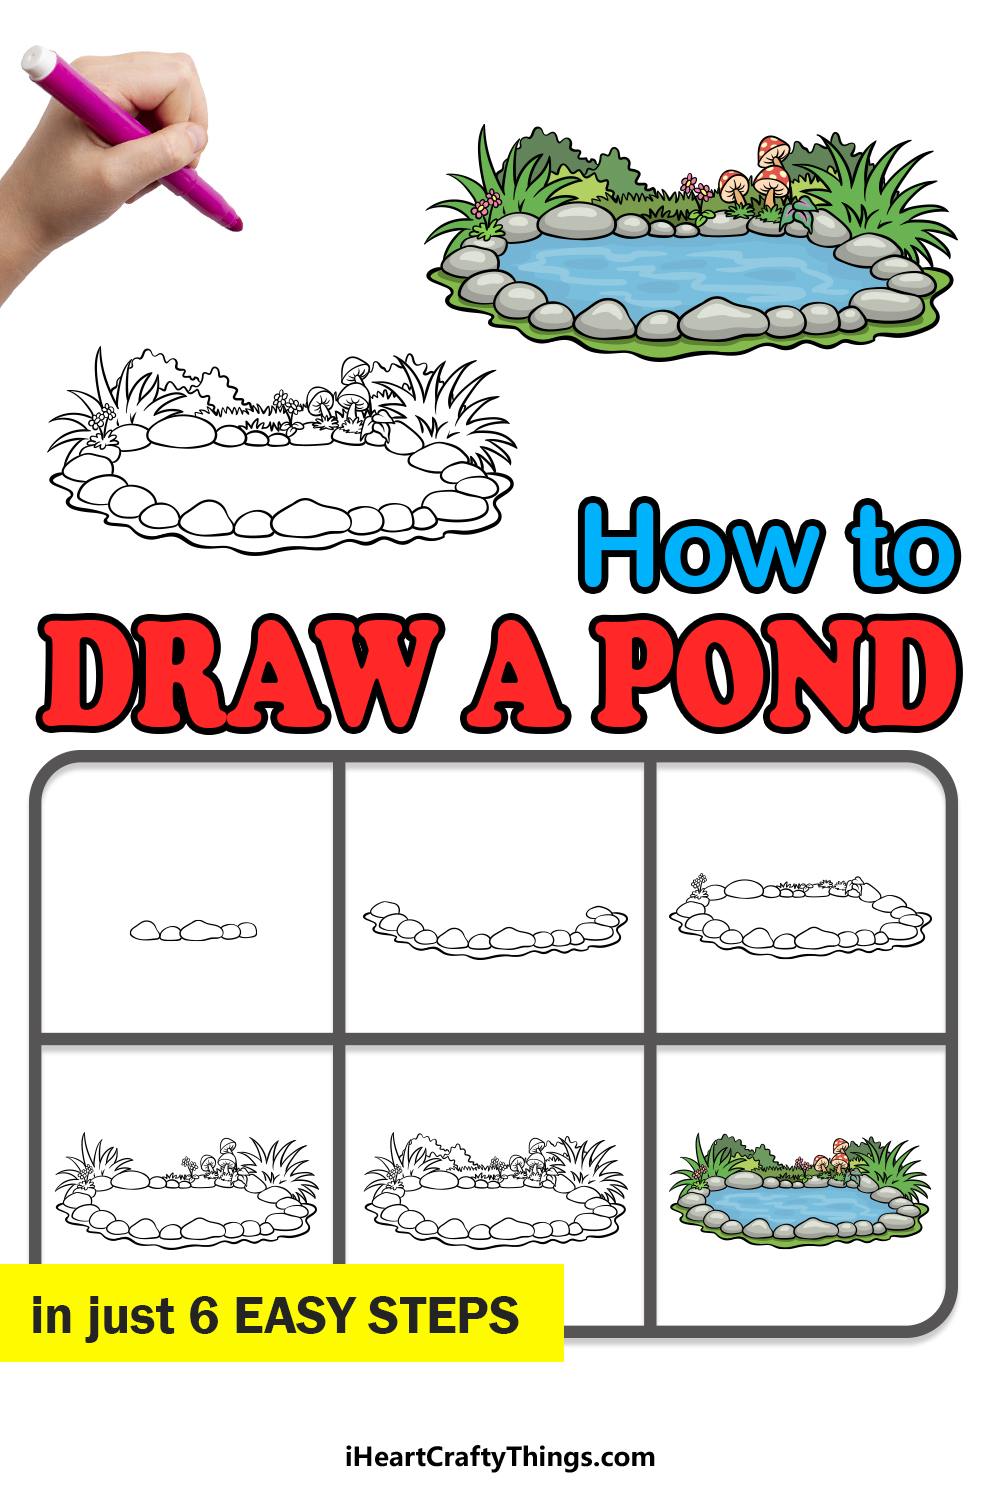 how to draw a pond in 6 easy steps